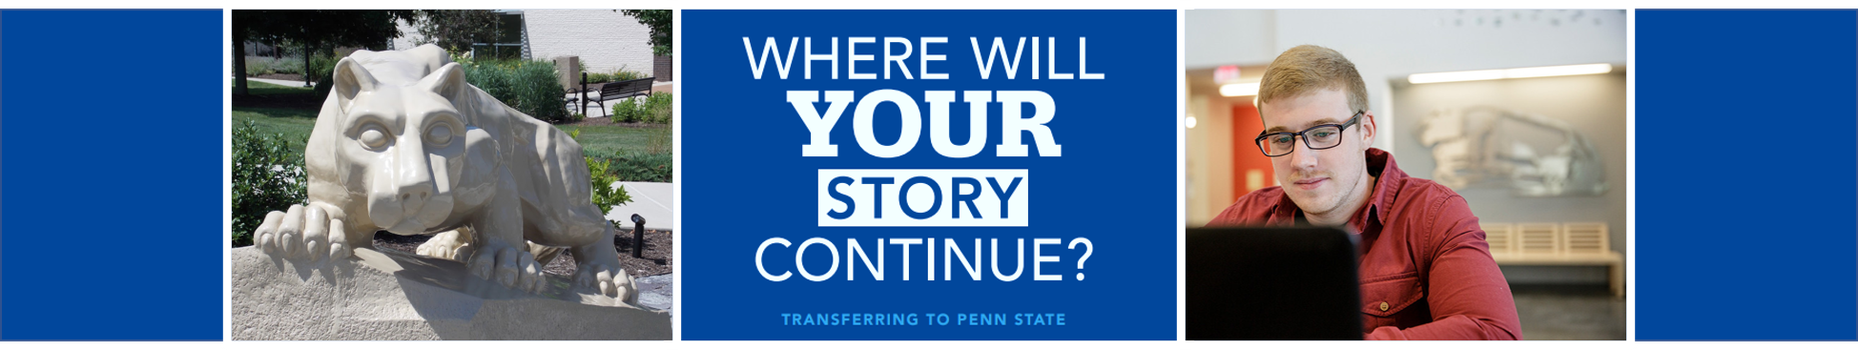 Where will your story continue? Transferring to Penn State